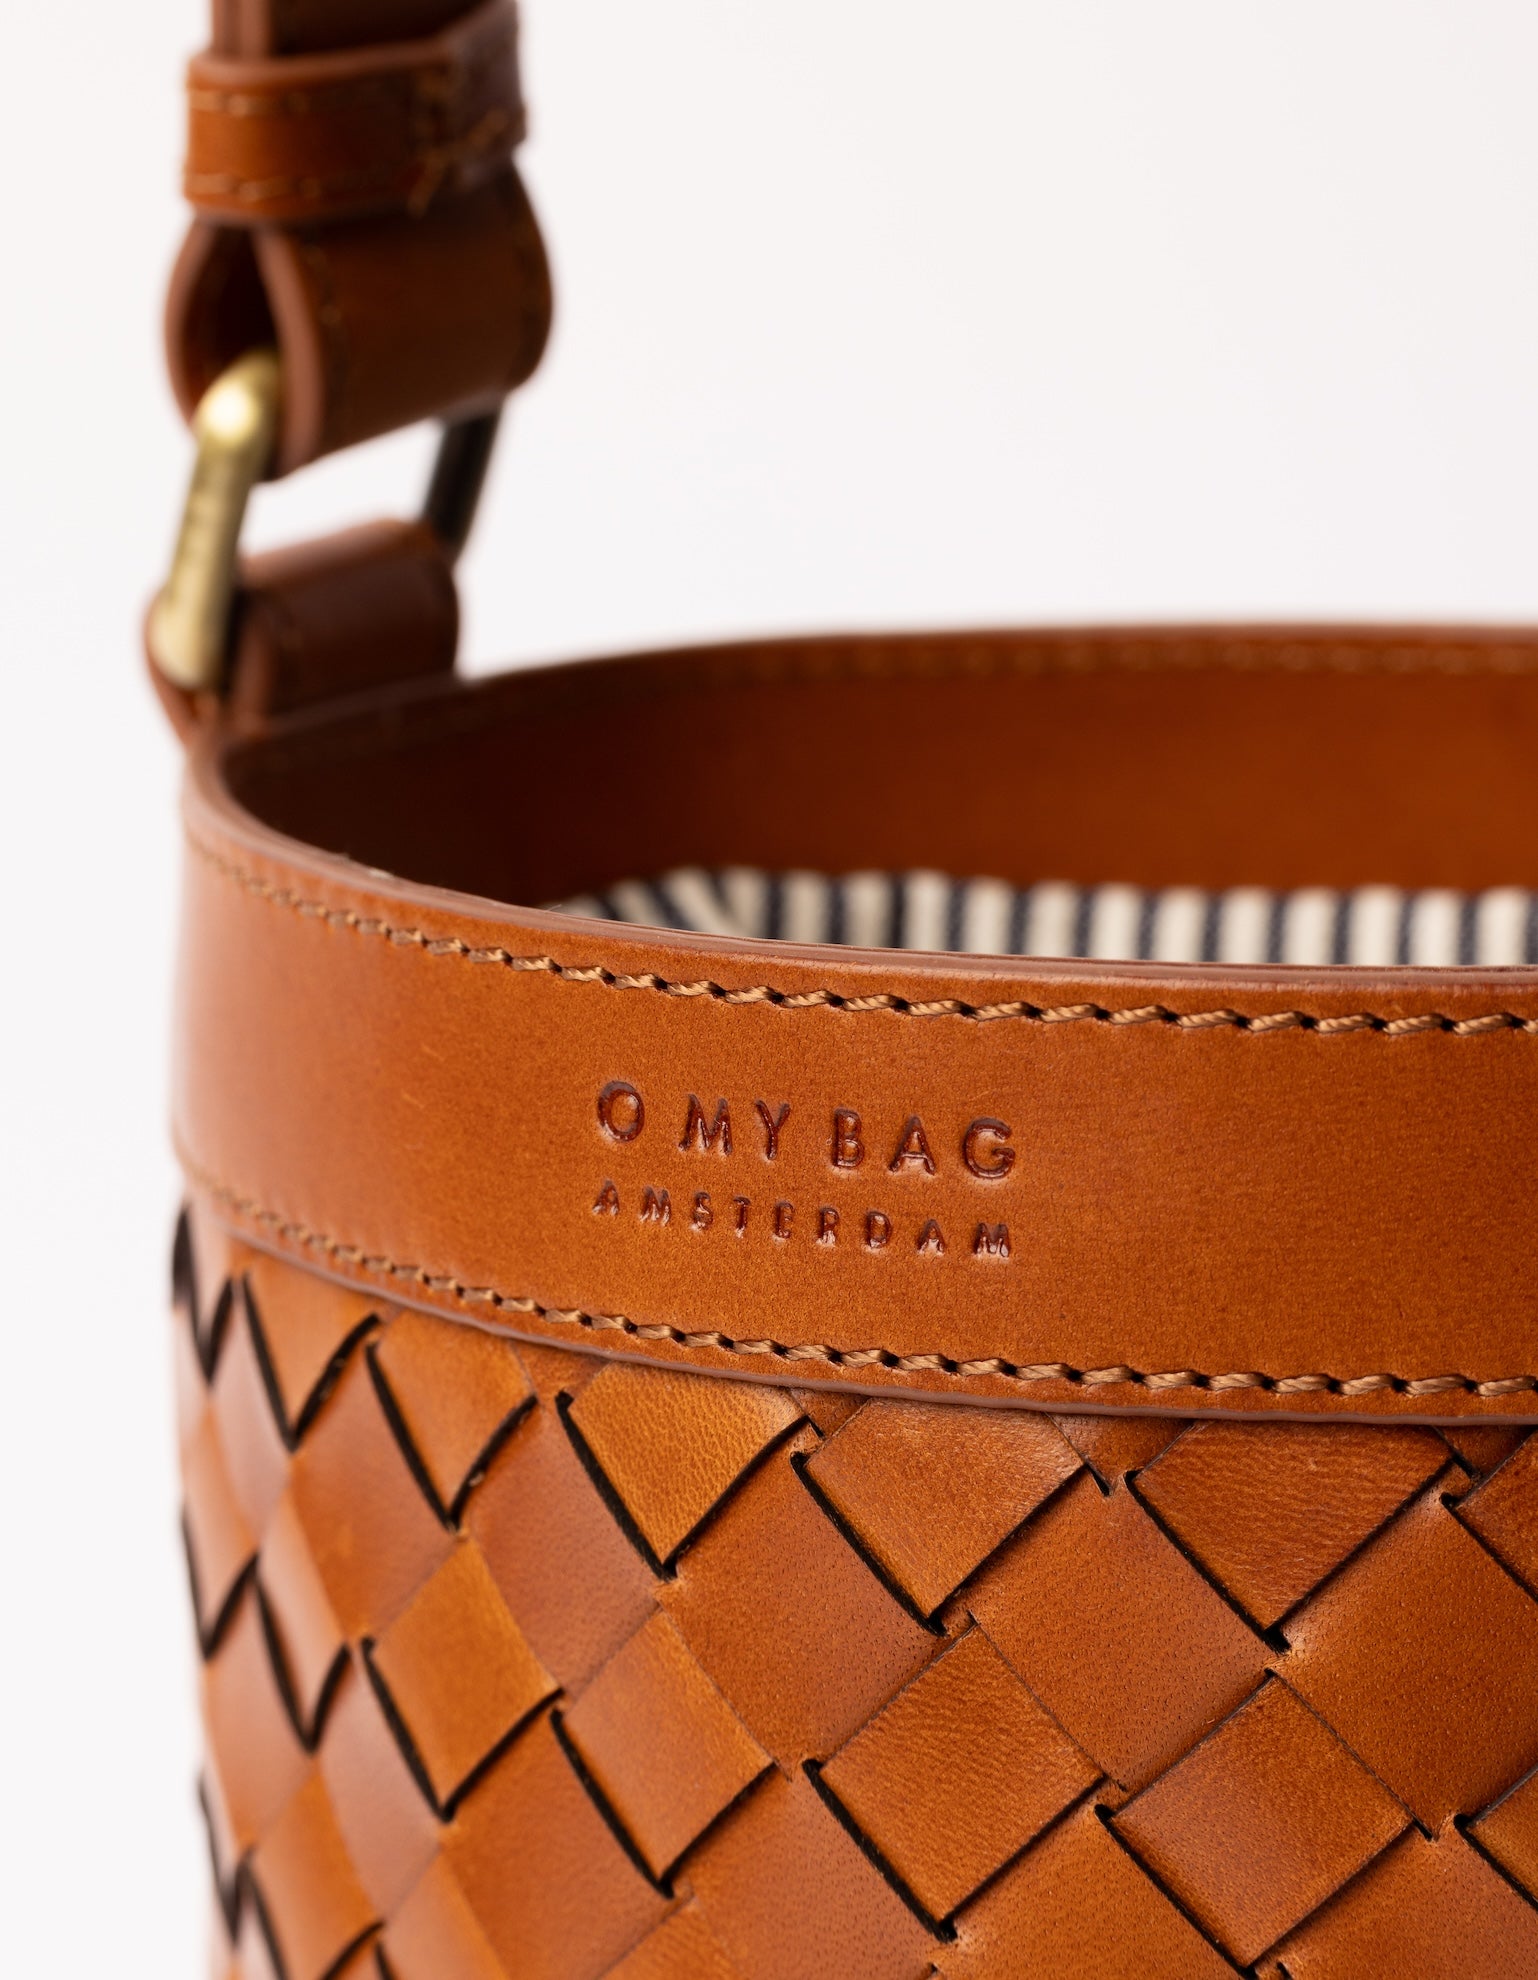 Zola woven leather bucket bag - close-up of logo